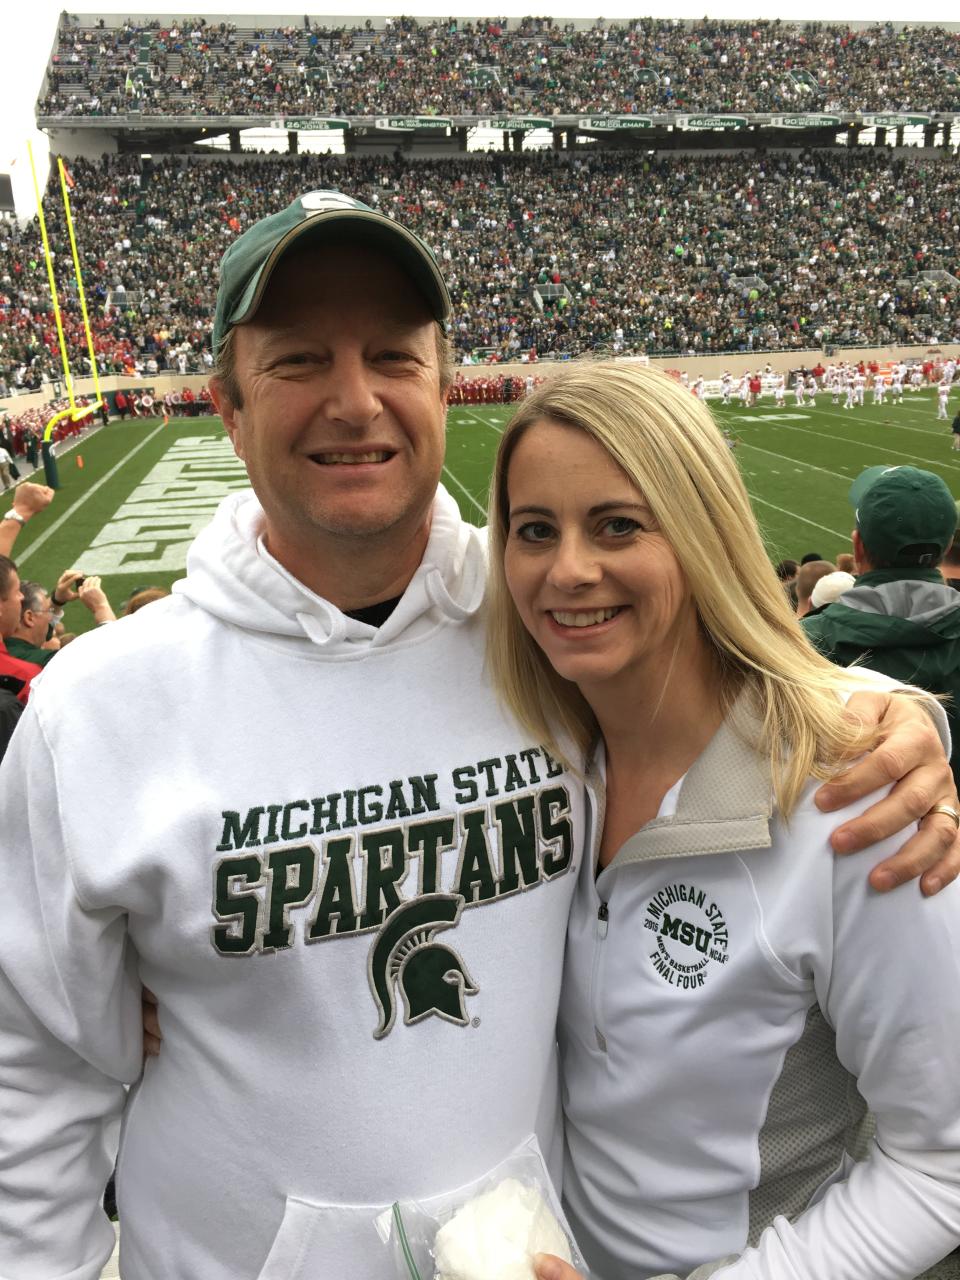 Professors Tina Timm and Adrian Blow at a Michigan State football game.